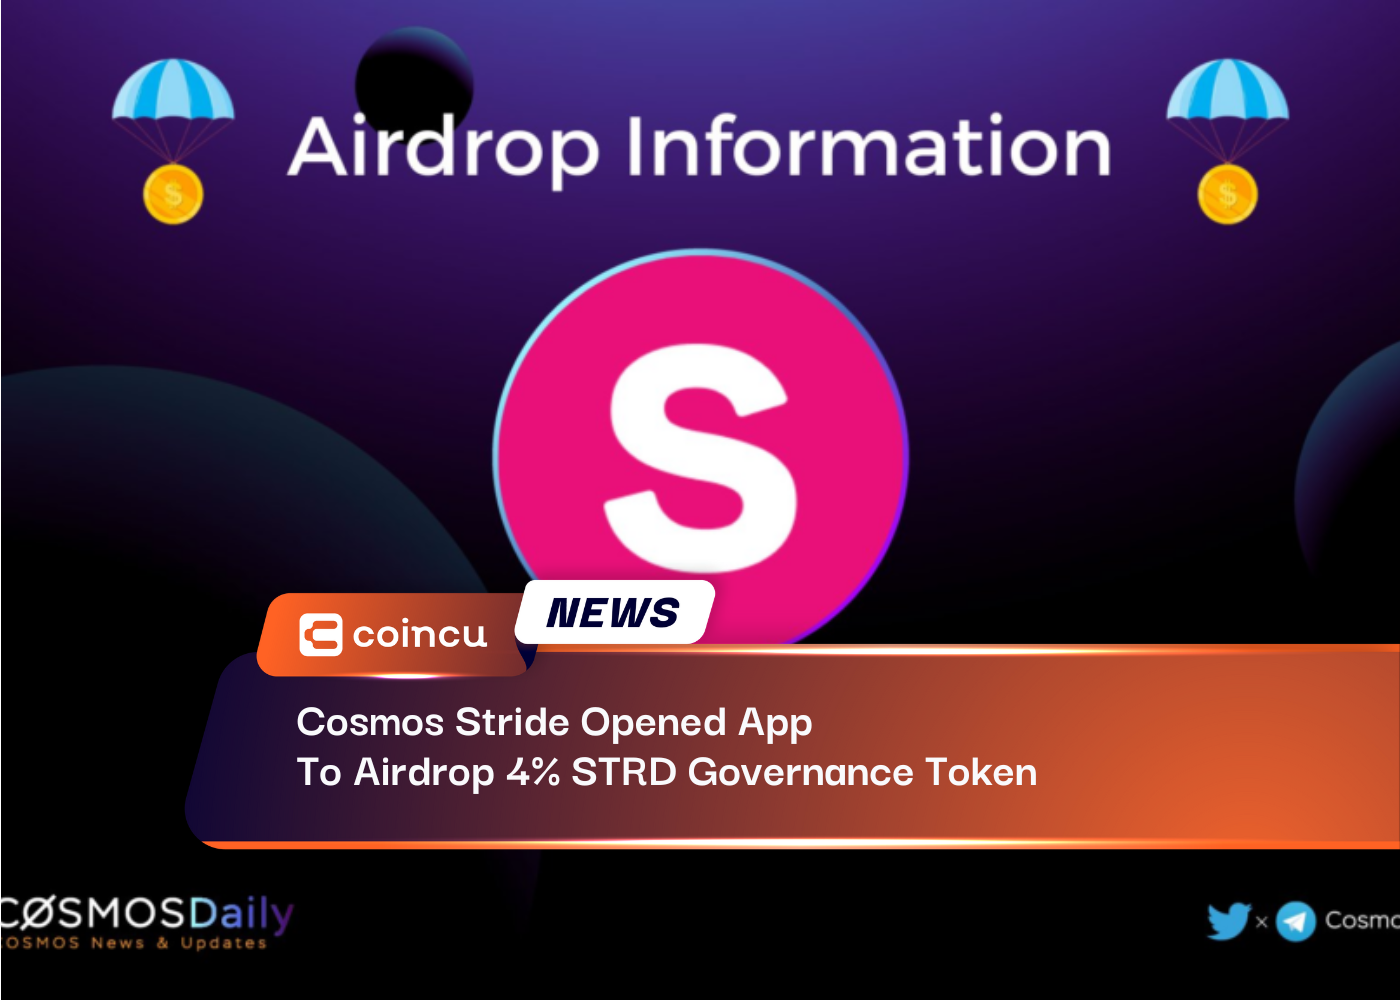 Cosmos Stride Opened App To Airdrop 4% STRD Governance Token